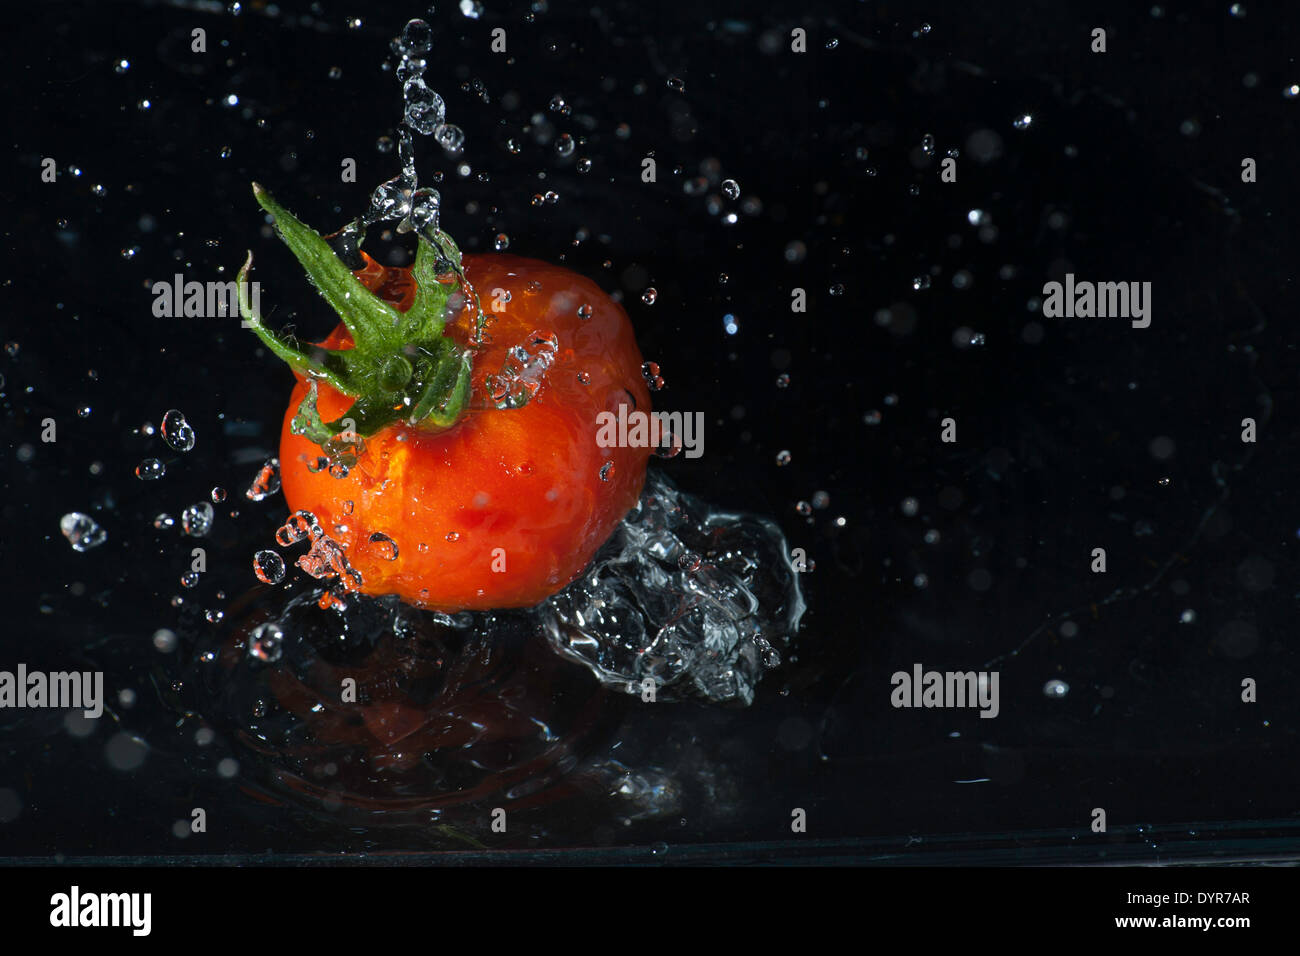 Red Tomato Dropped In Water Stock Photo